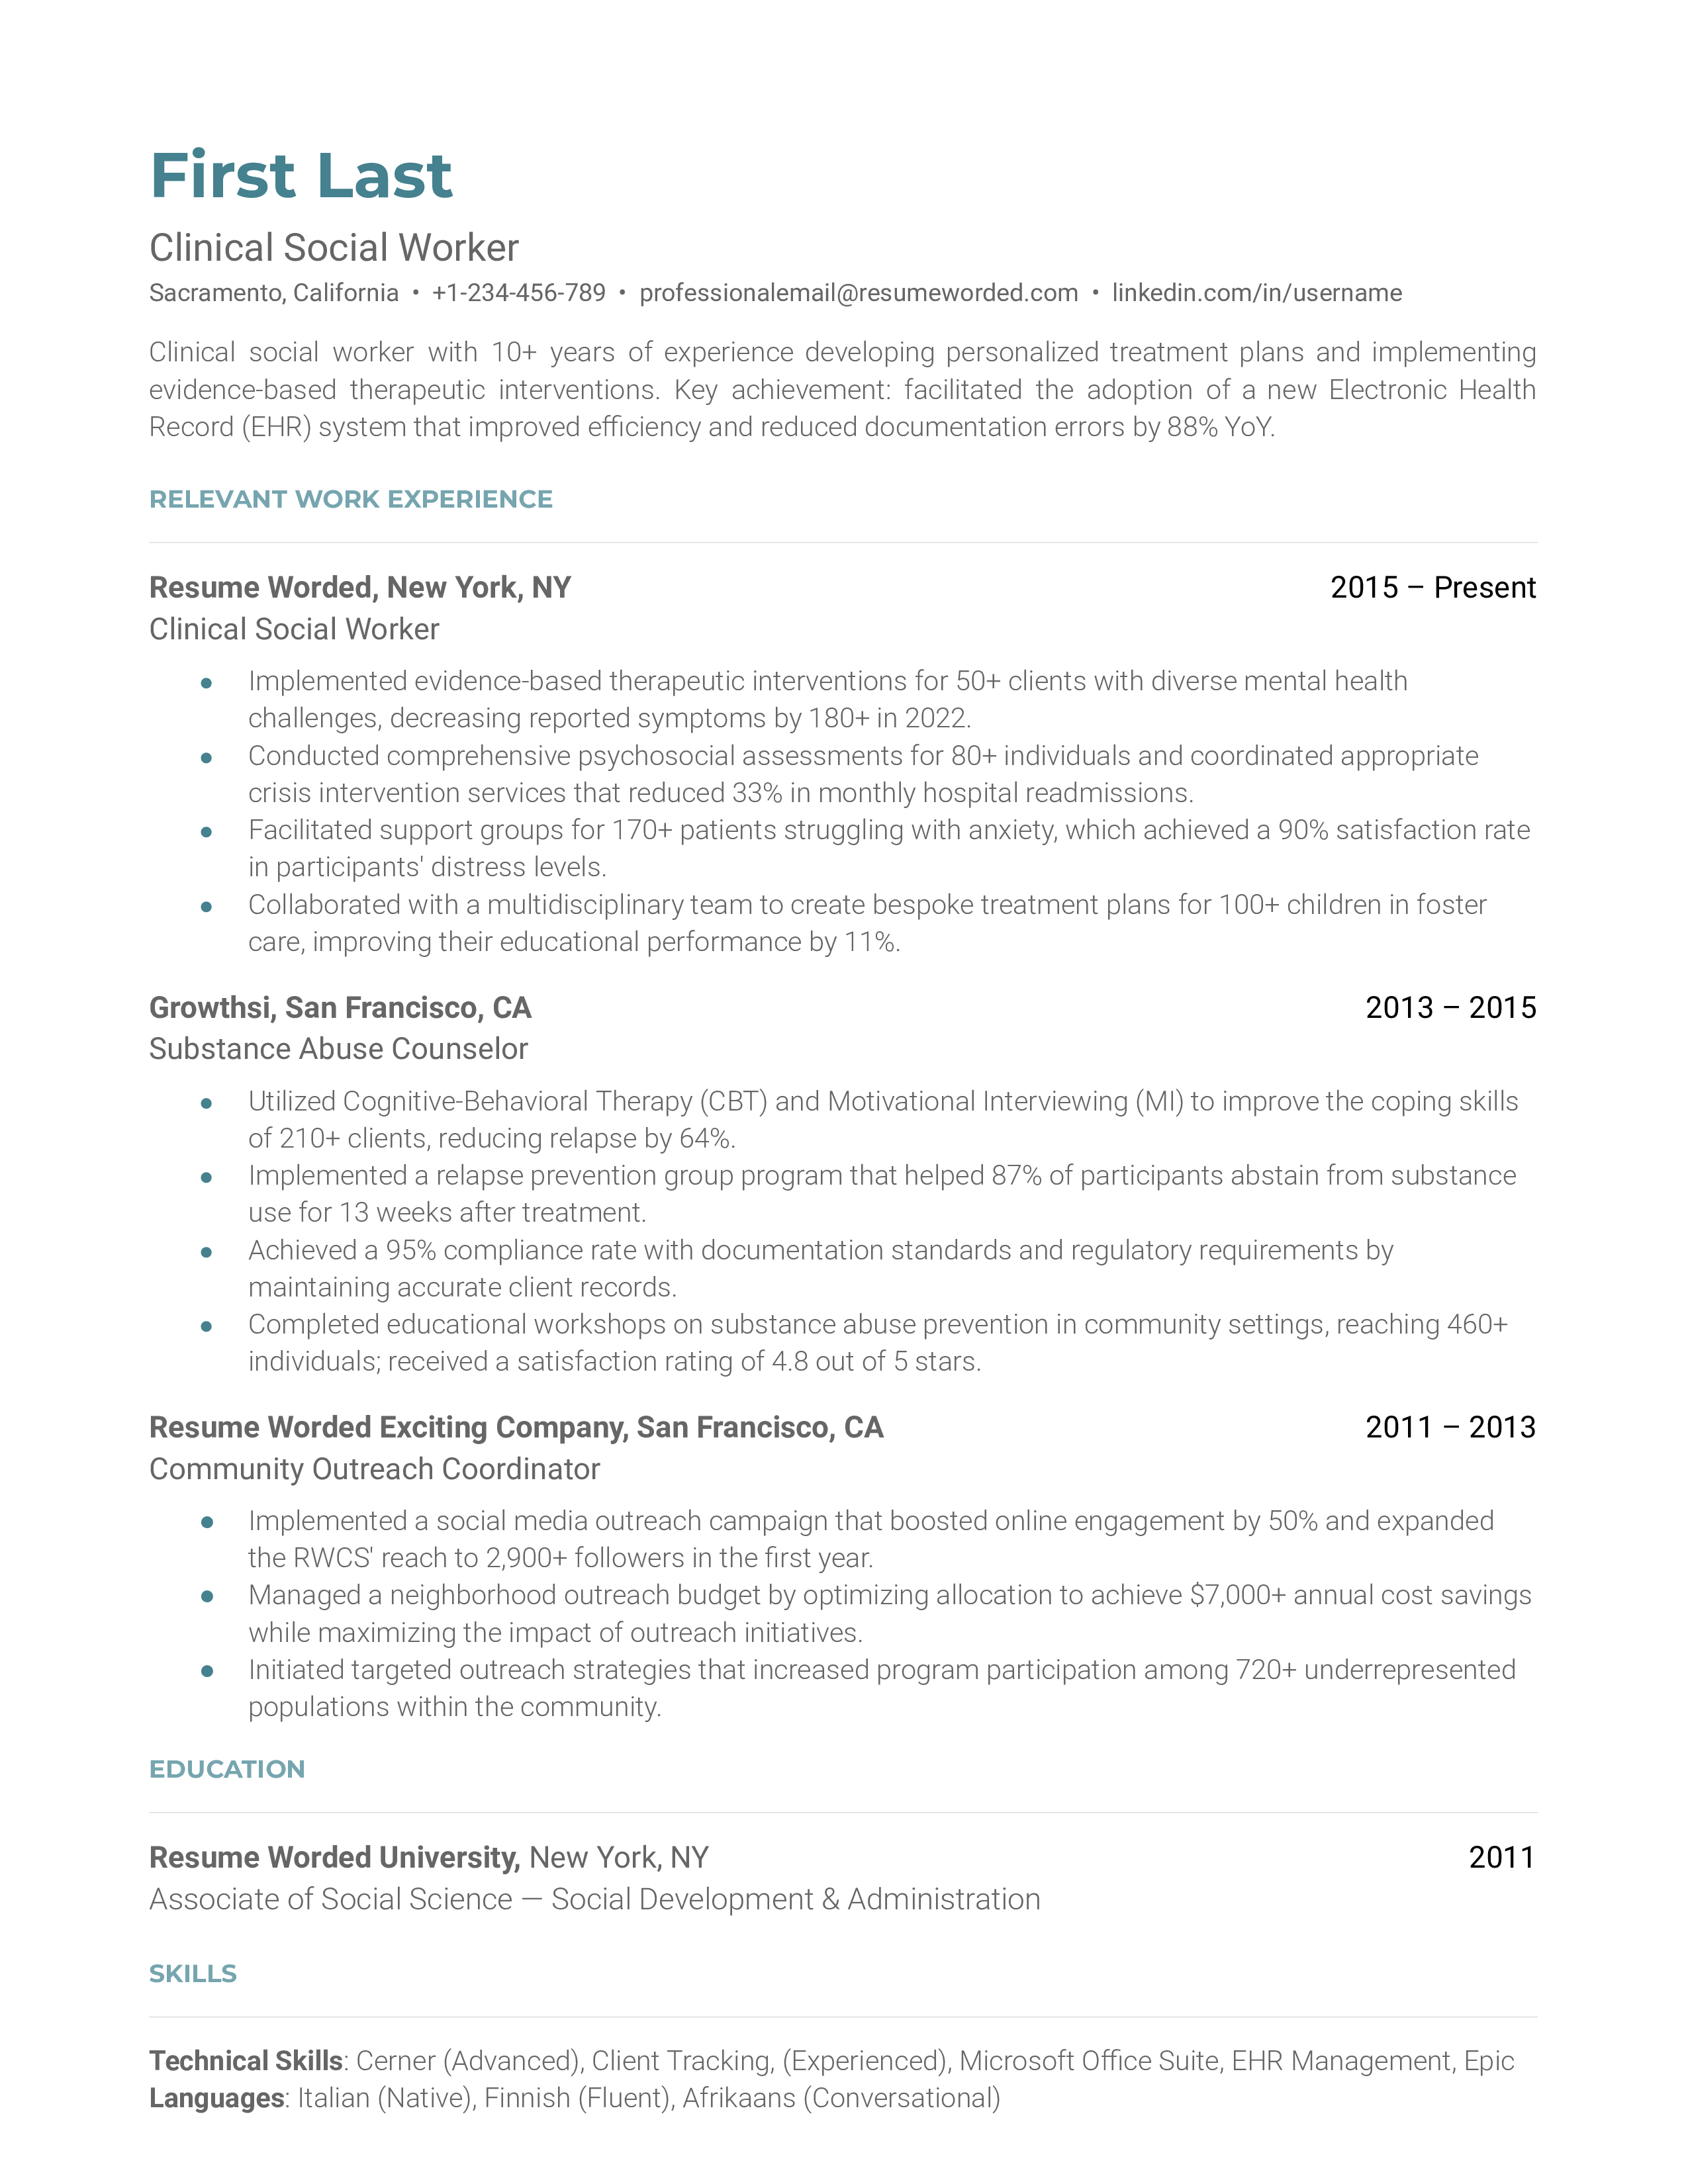 A resume screenshot displaying specialized skills and teamwork experience for a Clinical Social Worker role.